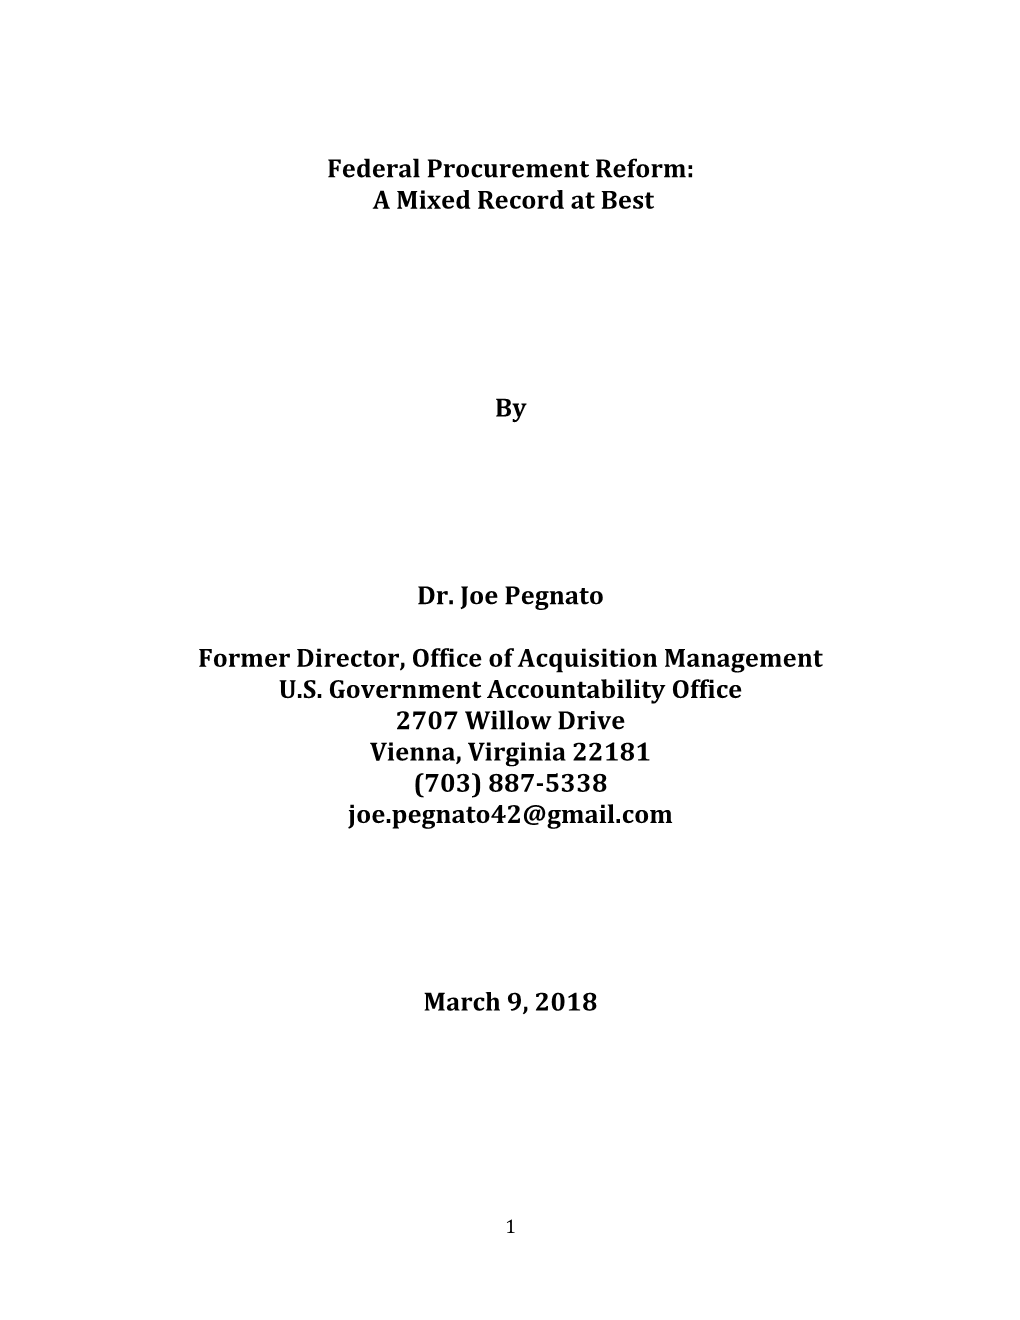 Federal Procurement Reform: a Mixed Record at Best by Dr. Joe Pegnato